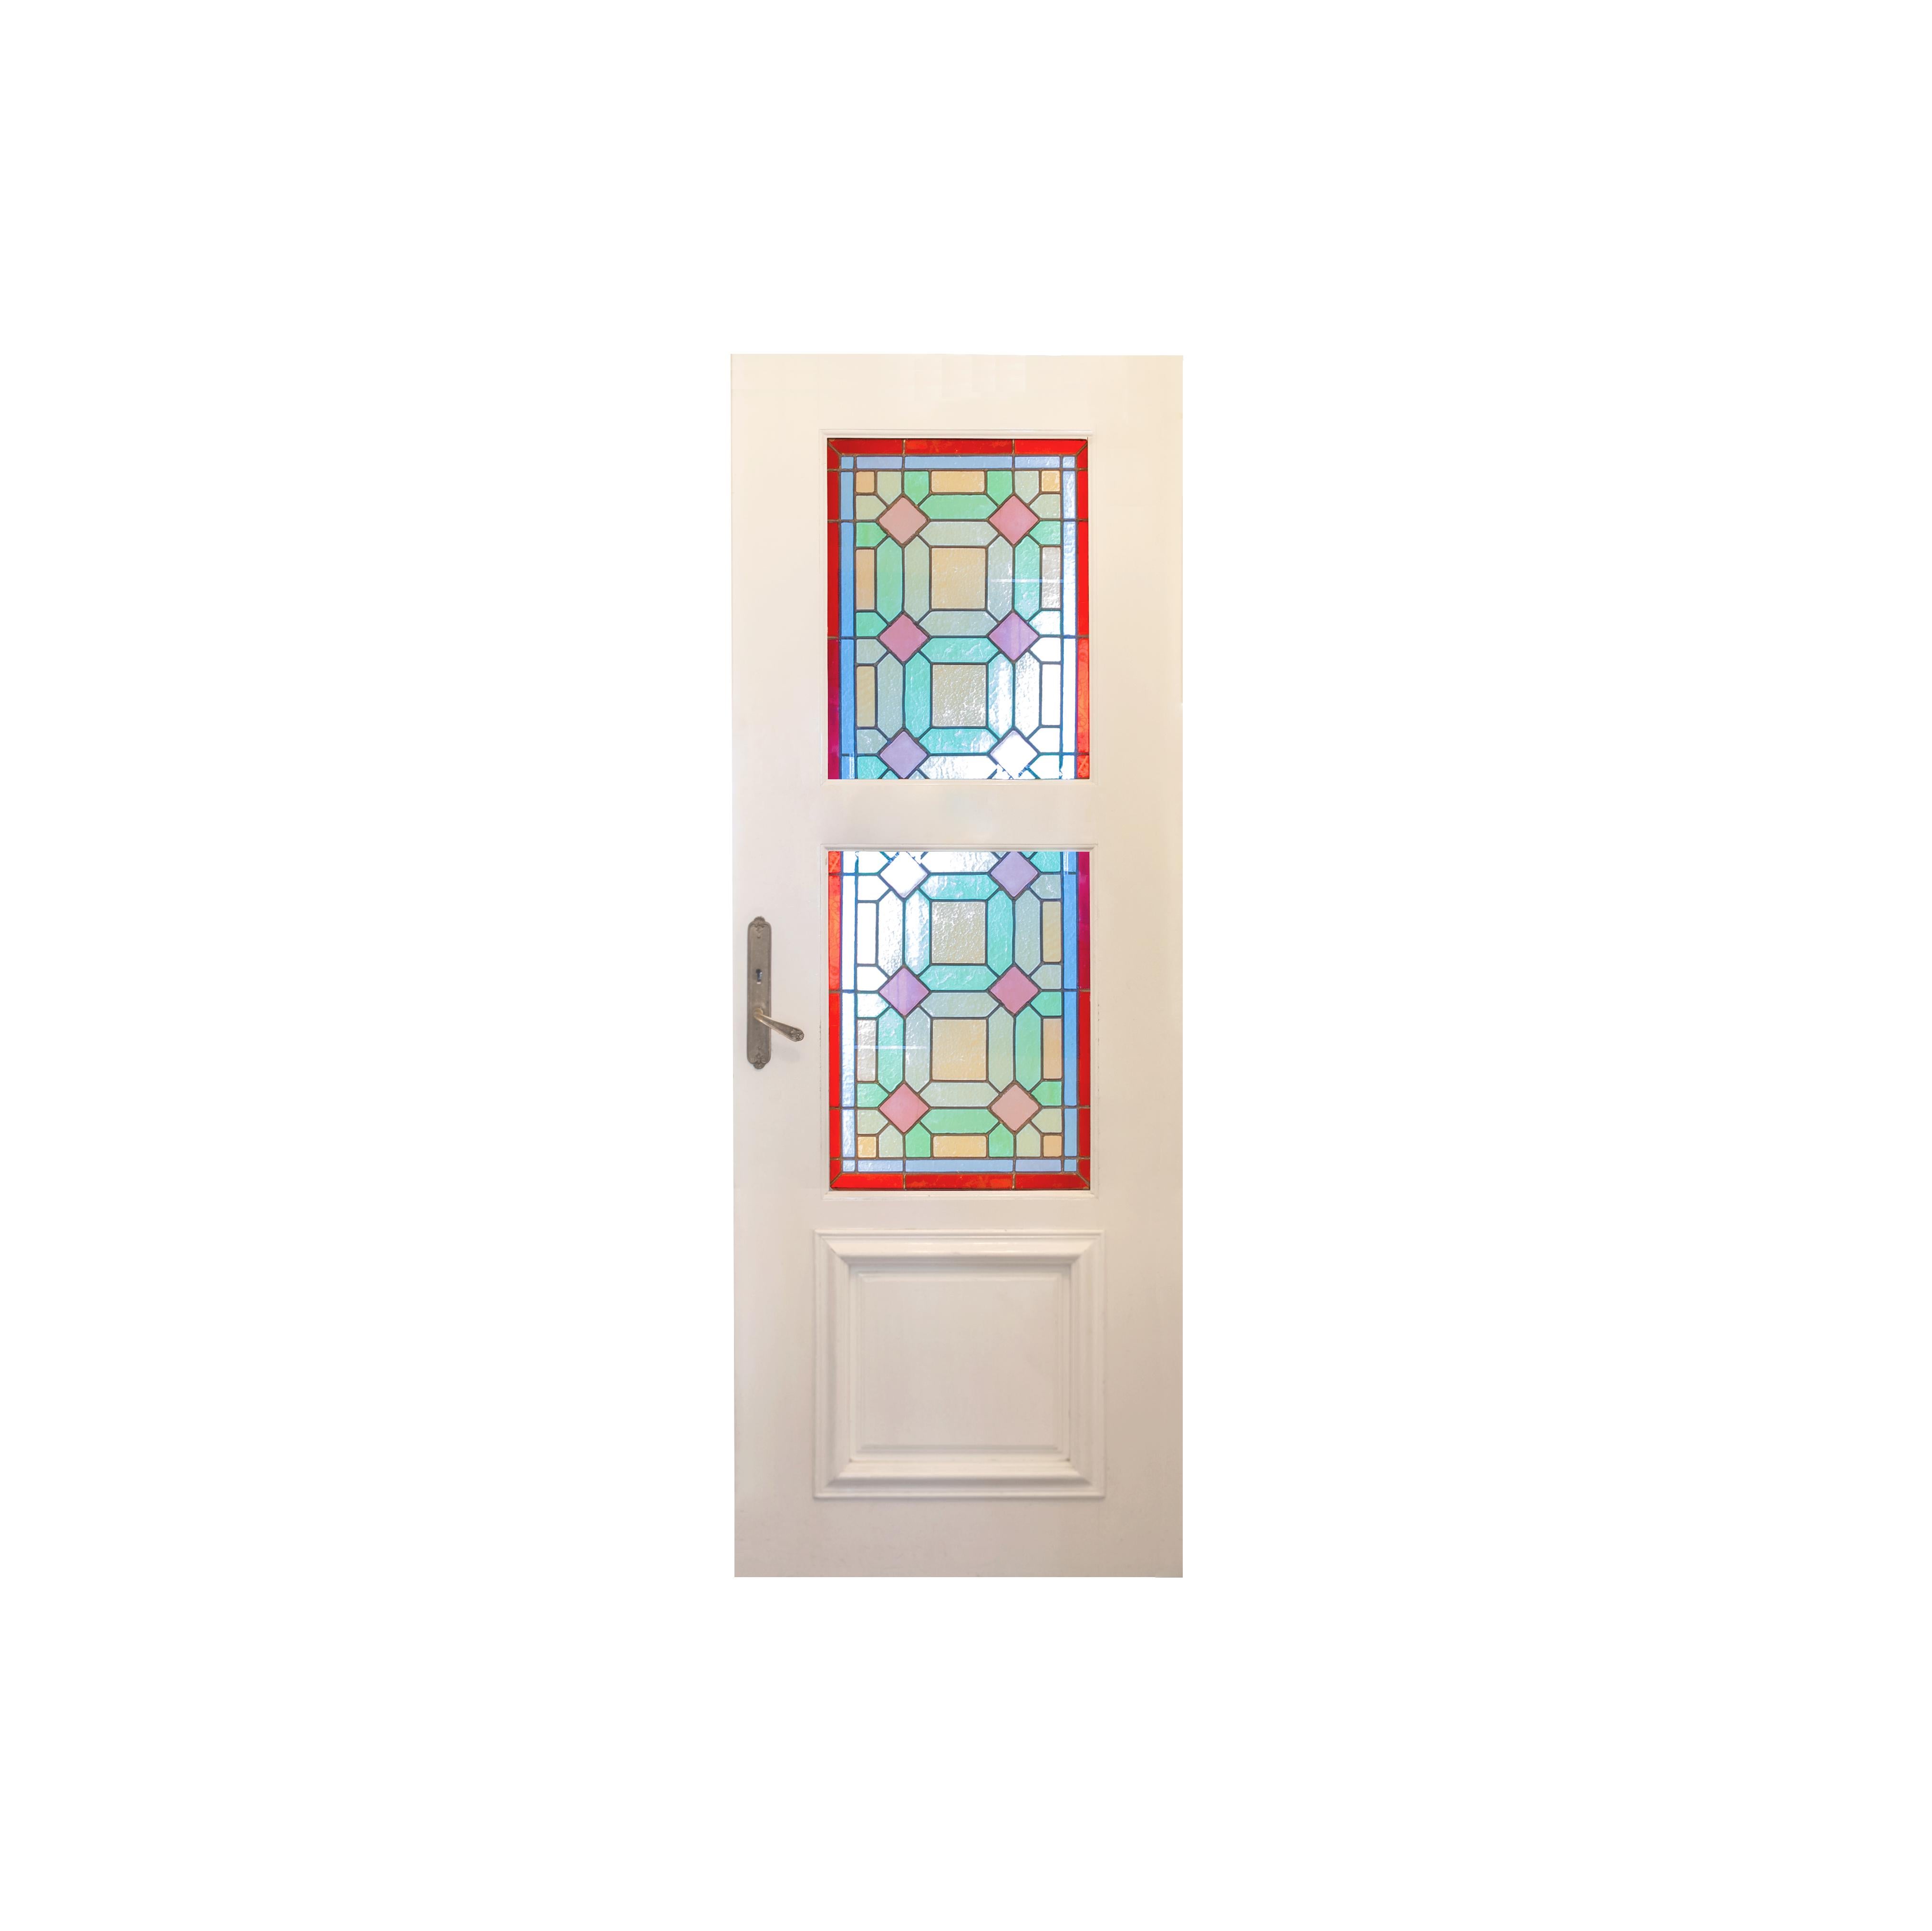 Set of 10 stained glass windows in five doors with brass handles. 
Beautiful stained glass from the Art Nouveau period with rich polychrome decoration. Each door has two glass panels framed in original lead channels

Doors: 30,9 x 82,28 in (78,5 x